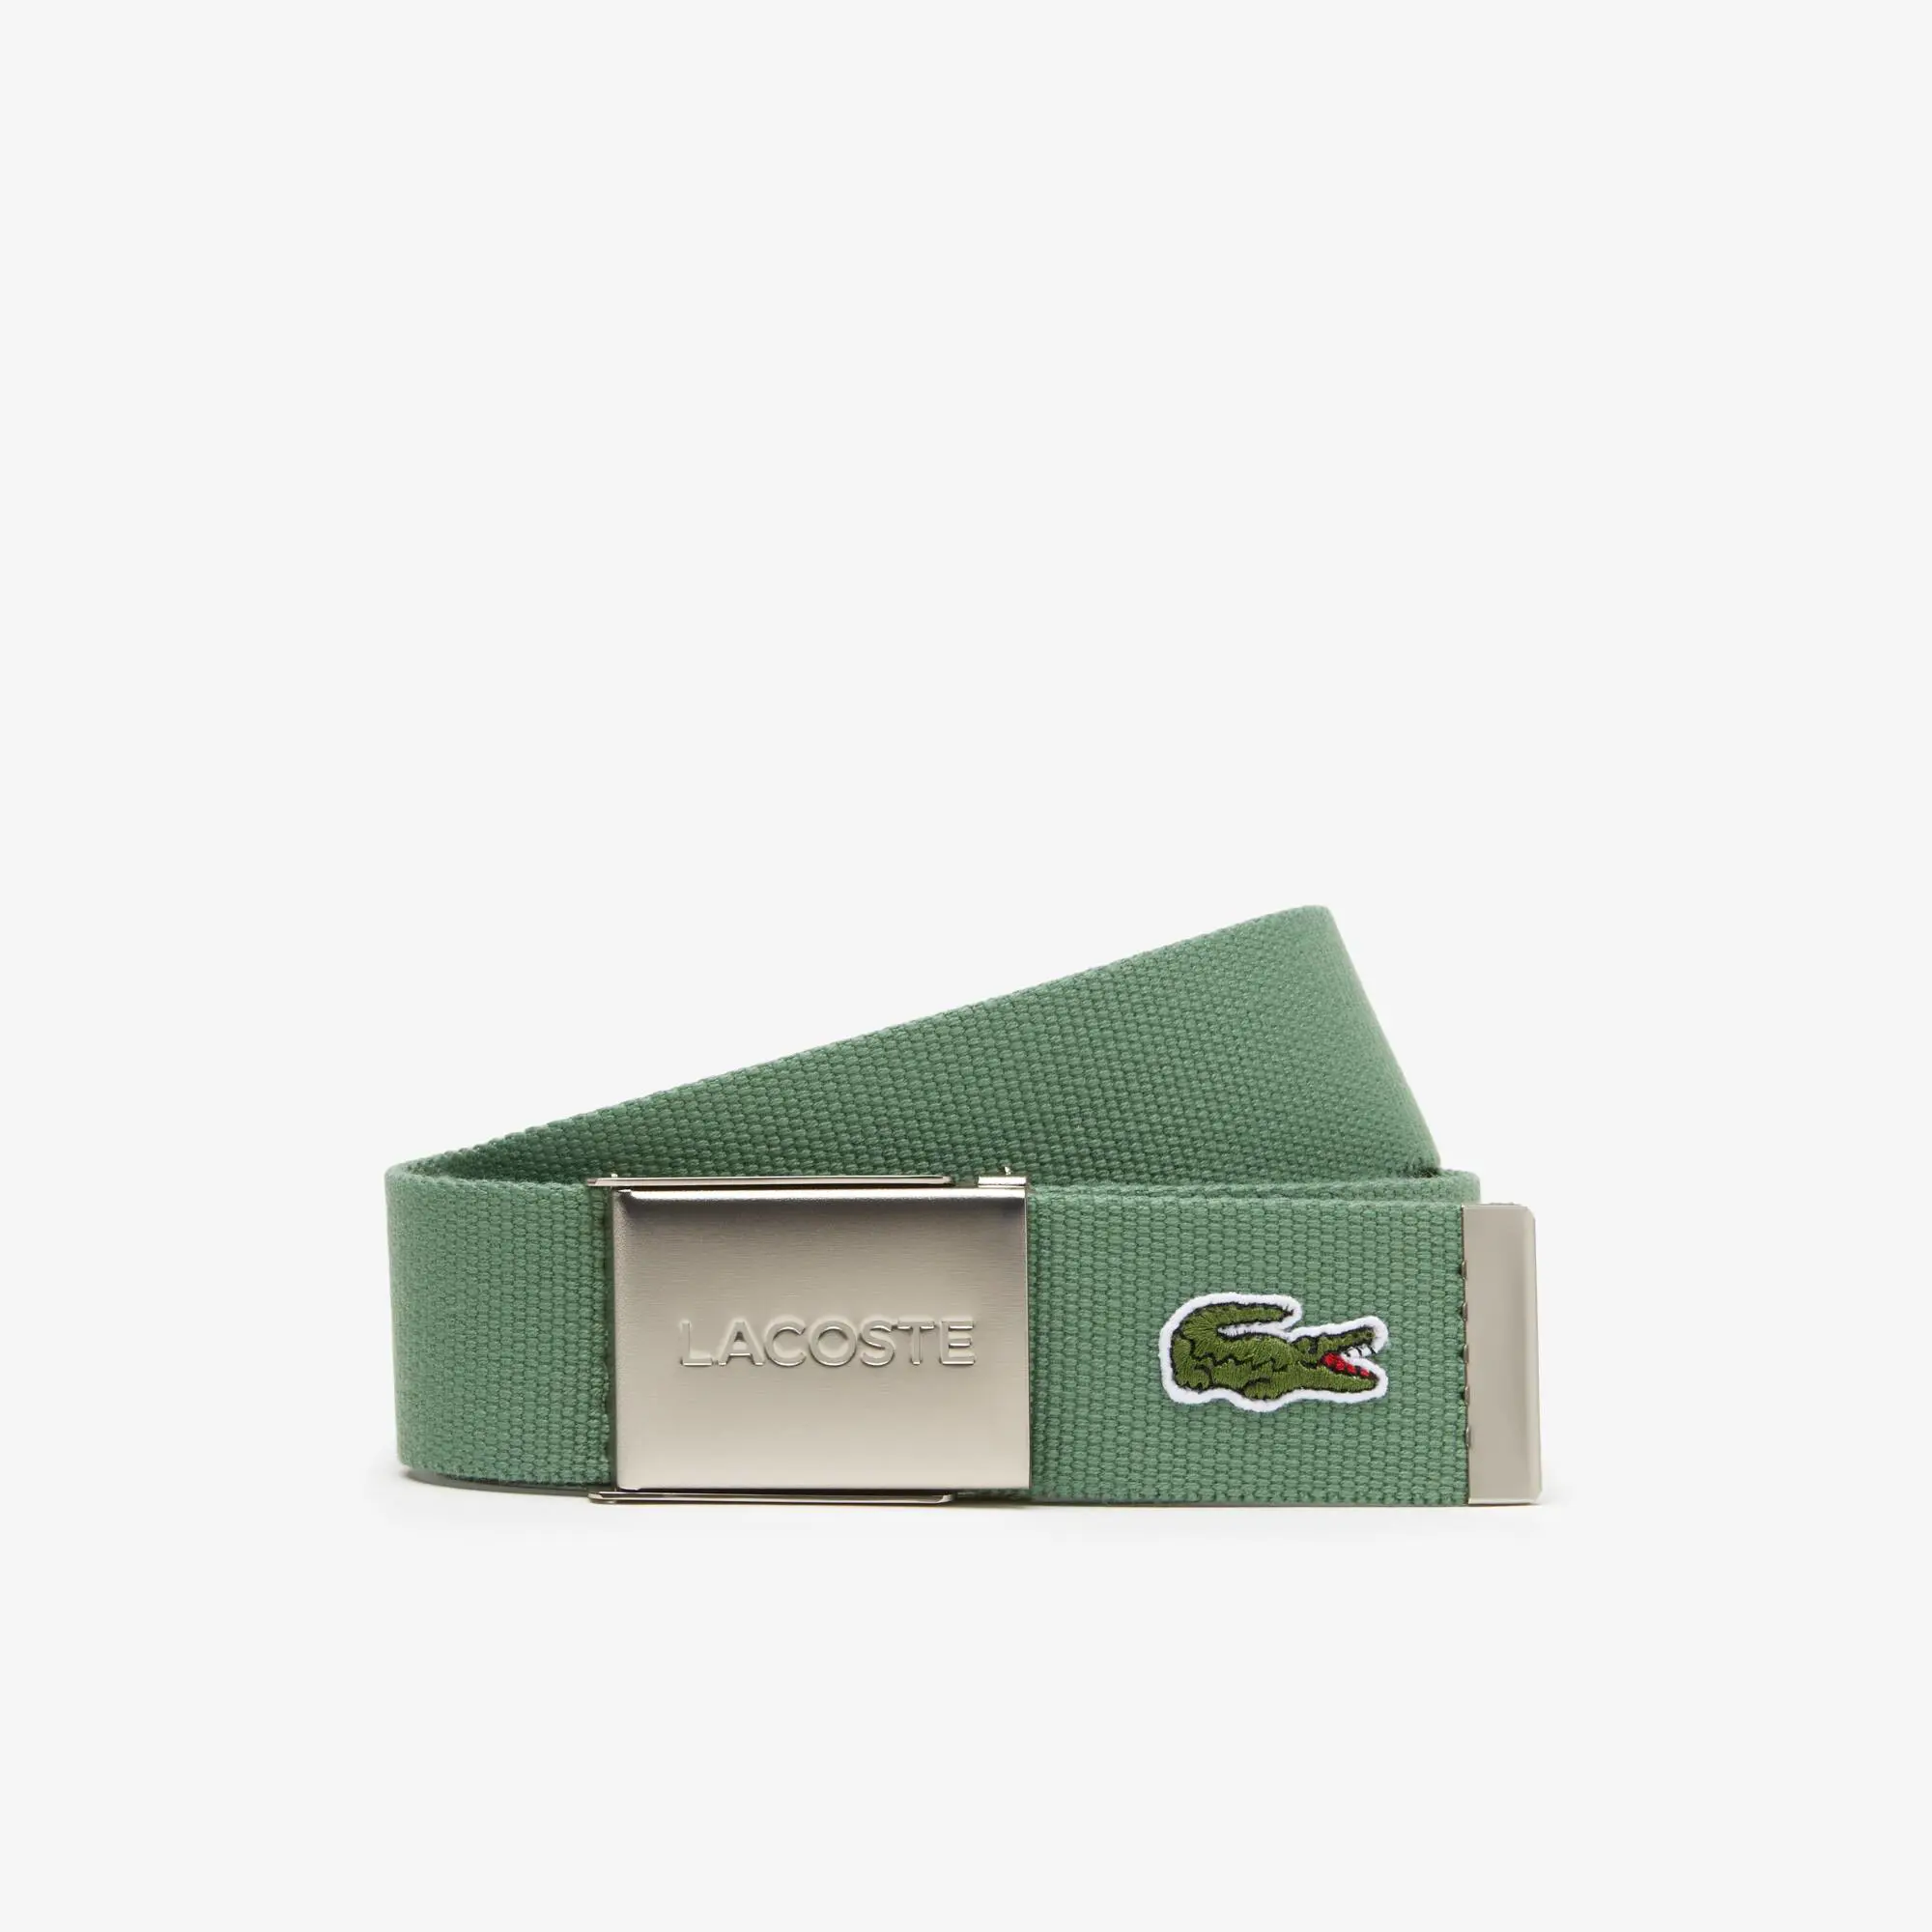 Lacoste Men's Made in France Lacoste Engraved Buckle Woven Fabric Belt. 1